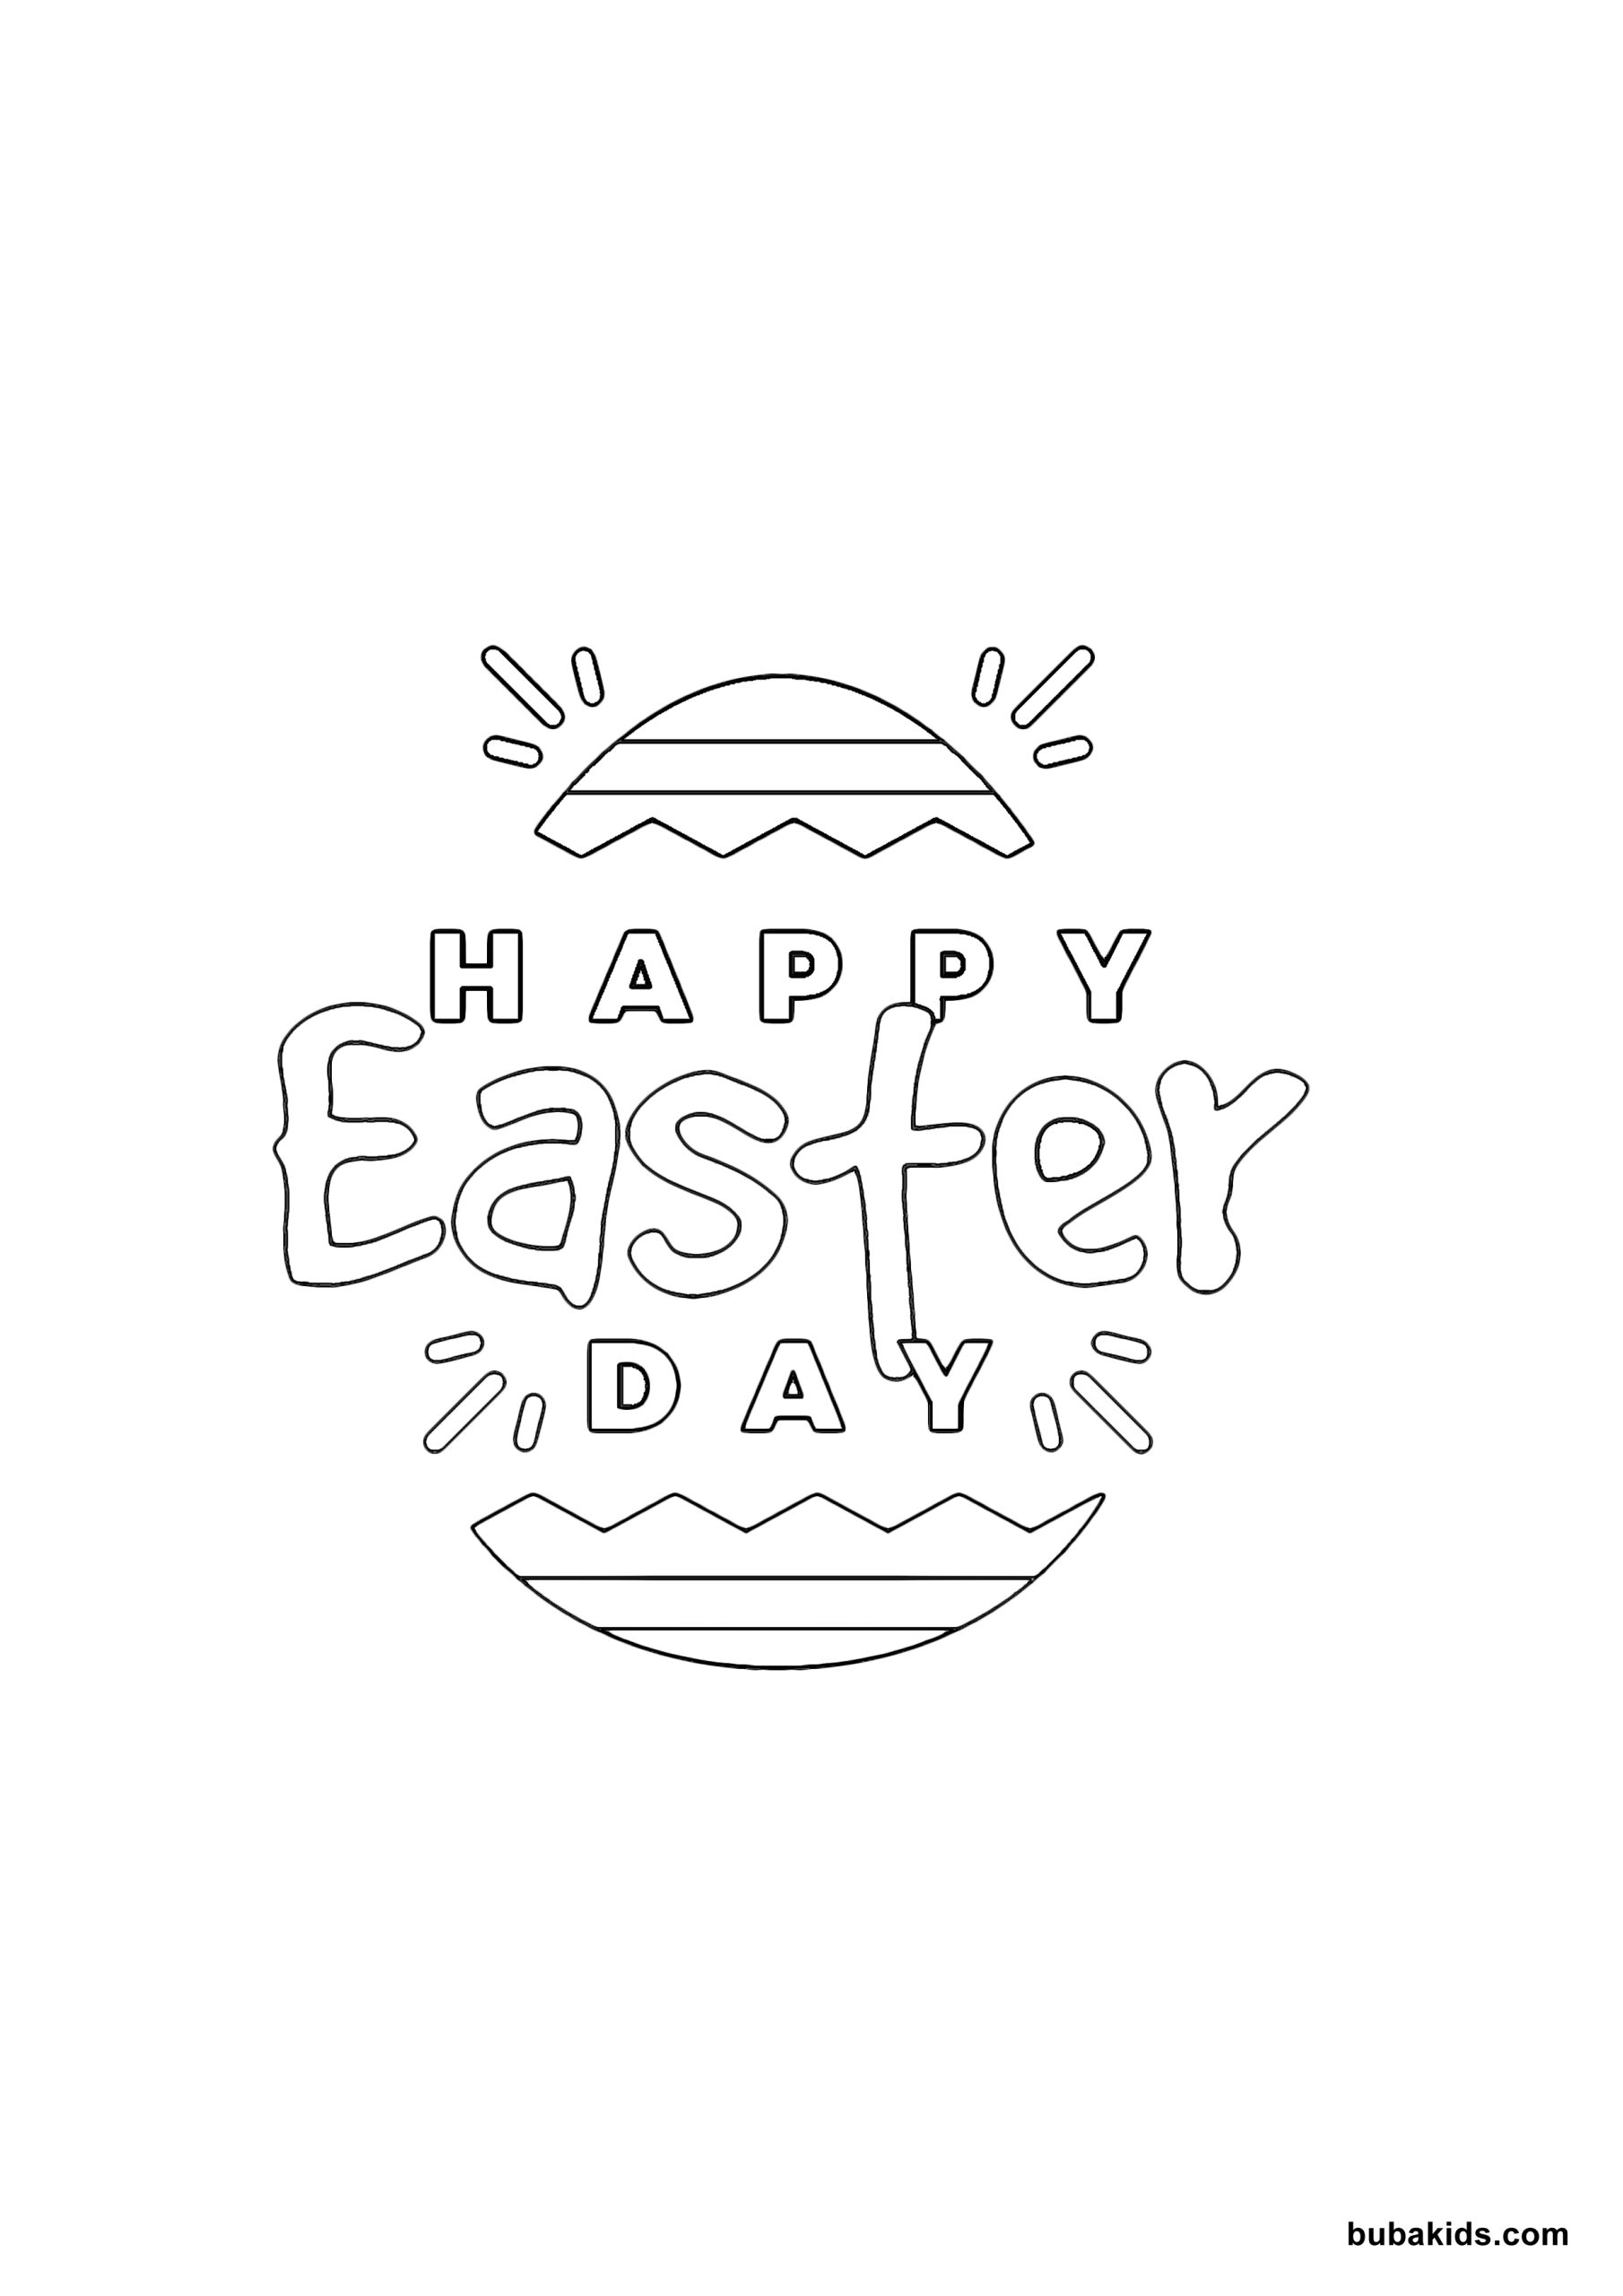 Happy easter day coloring page